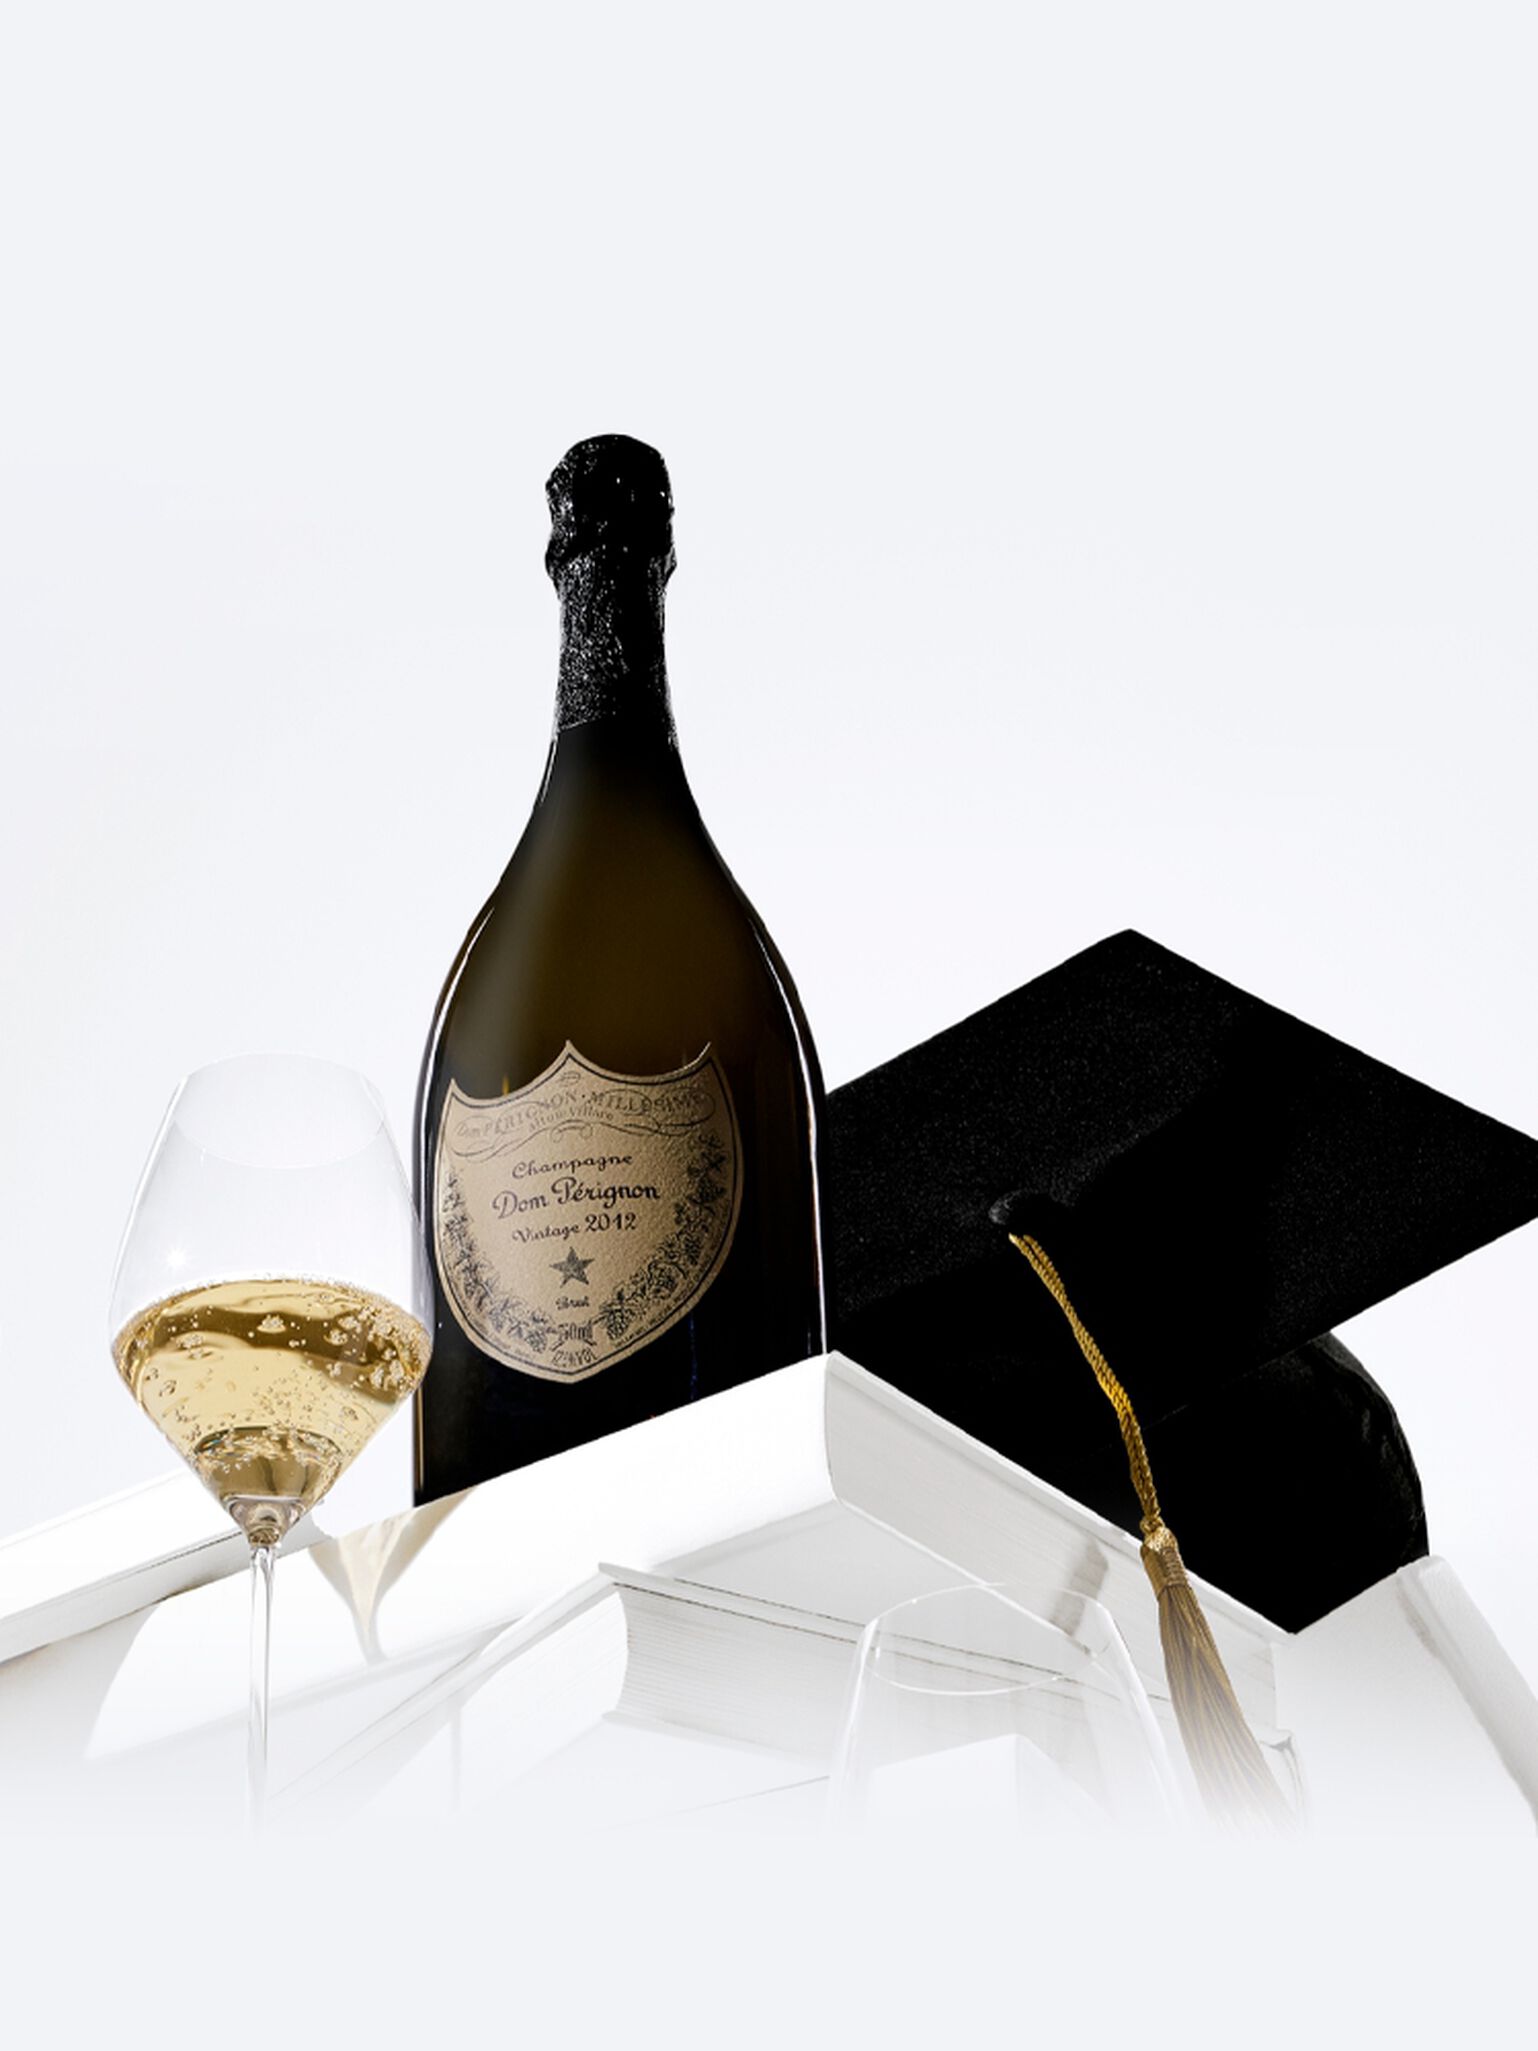 A bottle of Dom Perignon champagne with two flute glasses and a Graduation hat